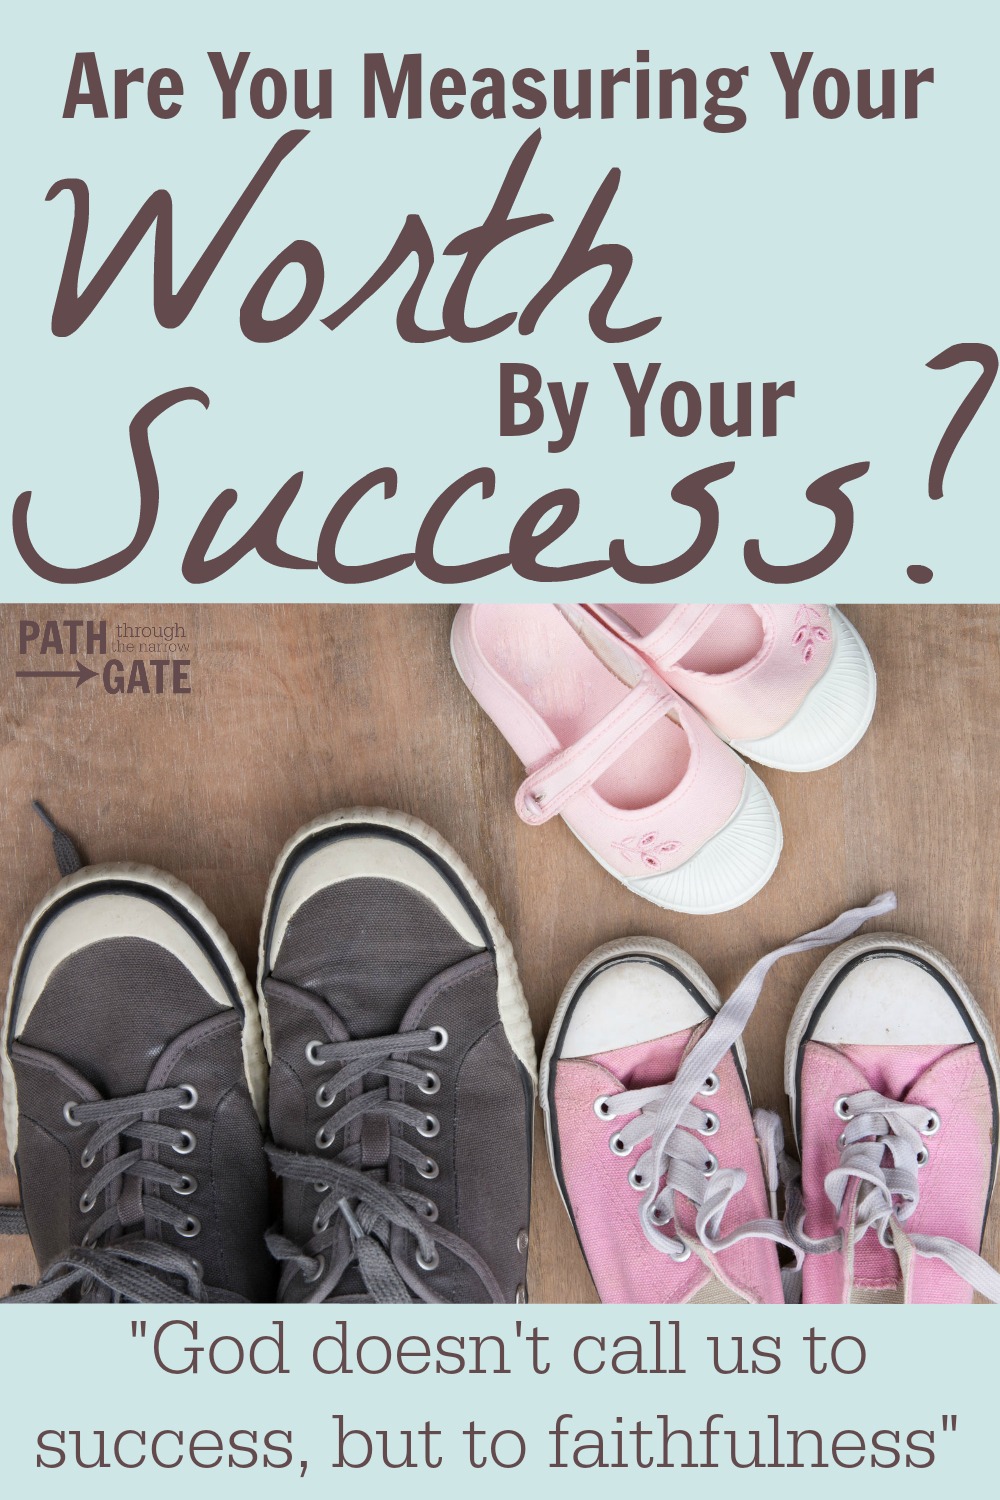 Do you measure your worth by the amount of success you have in your life? God measures your worth by your faithfulness, not your success.|Are you Measuring Your Worth by Your Success?|Path Through the Narrow Gate